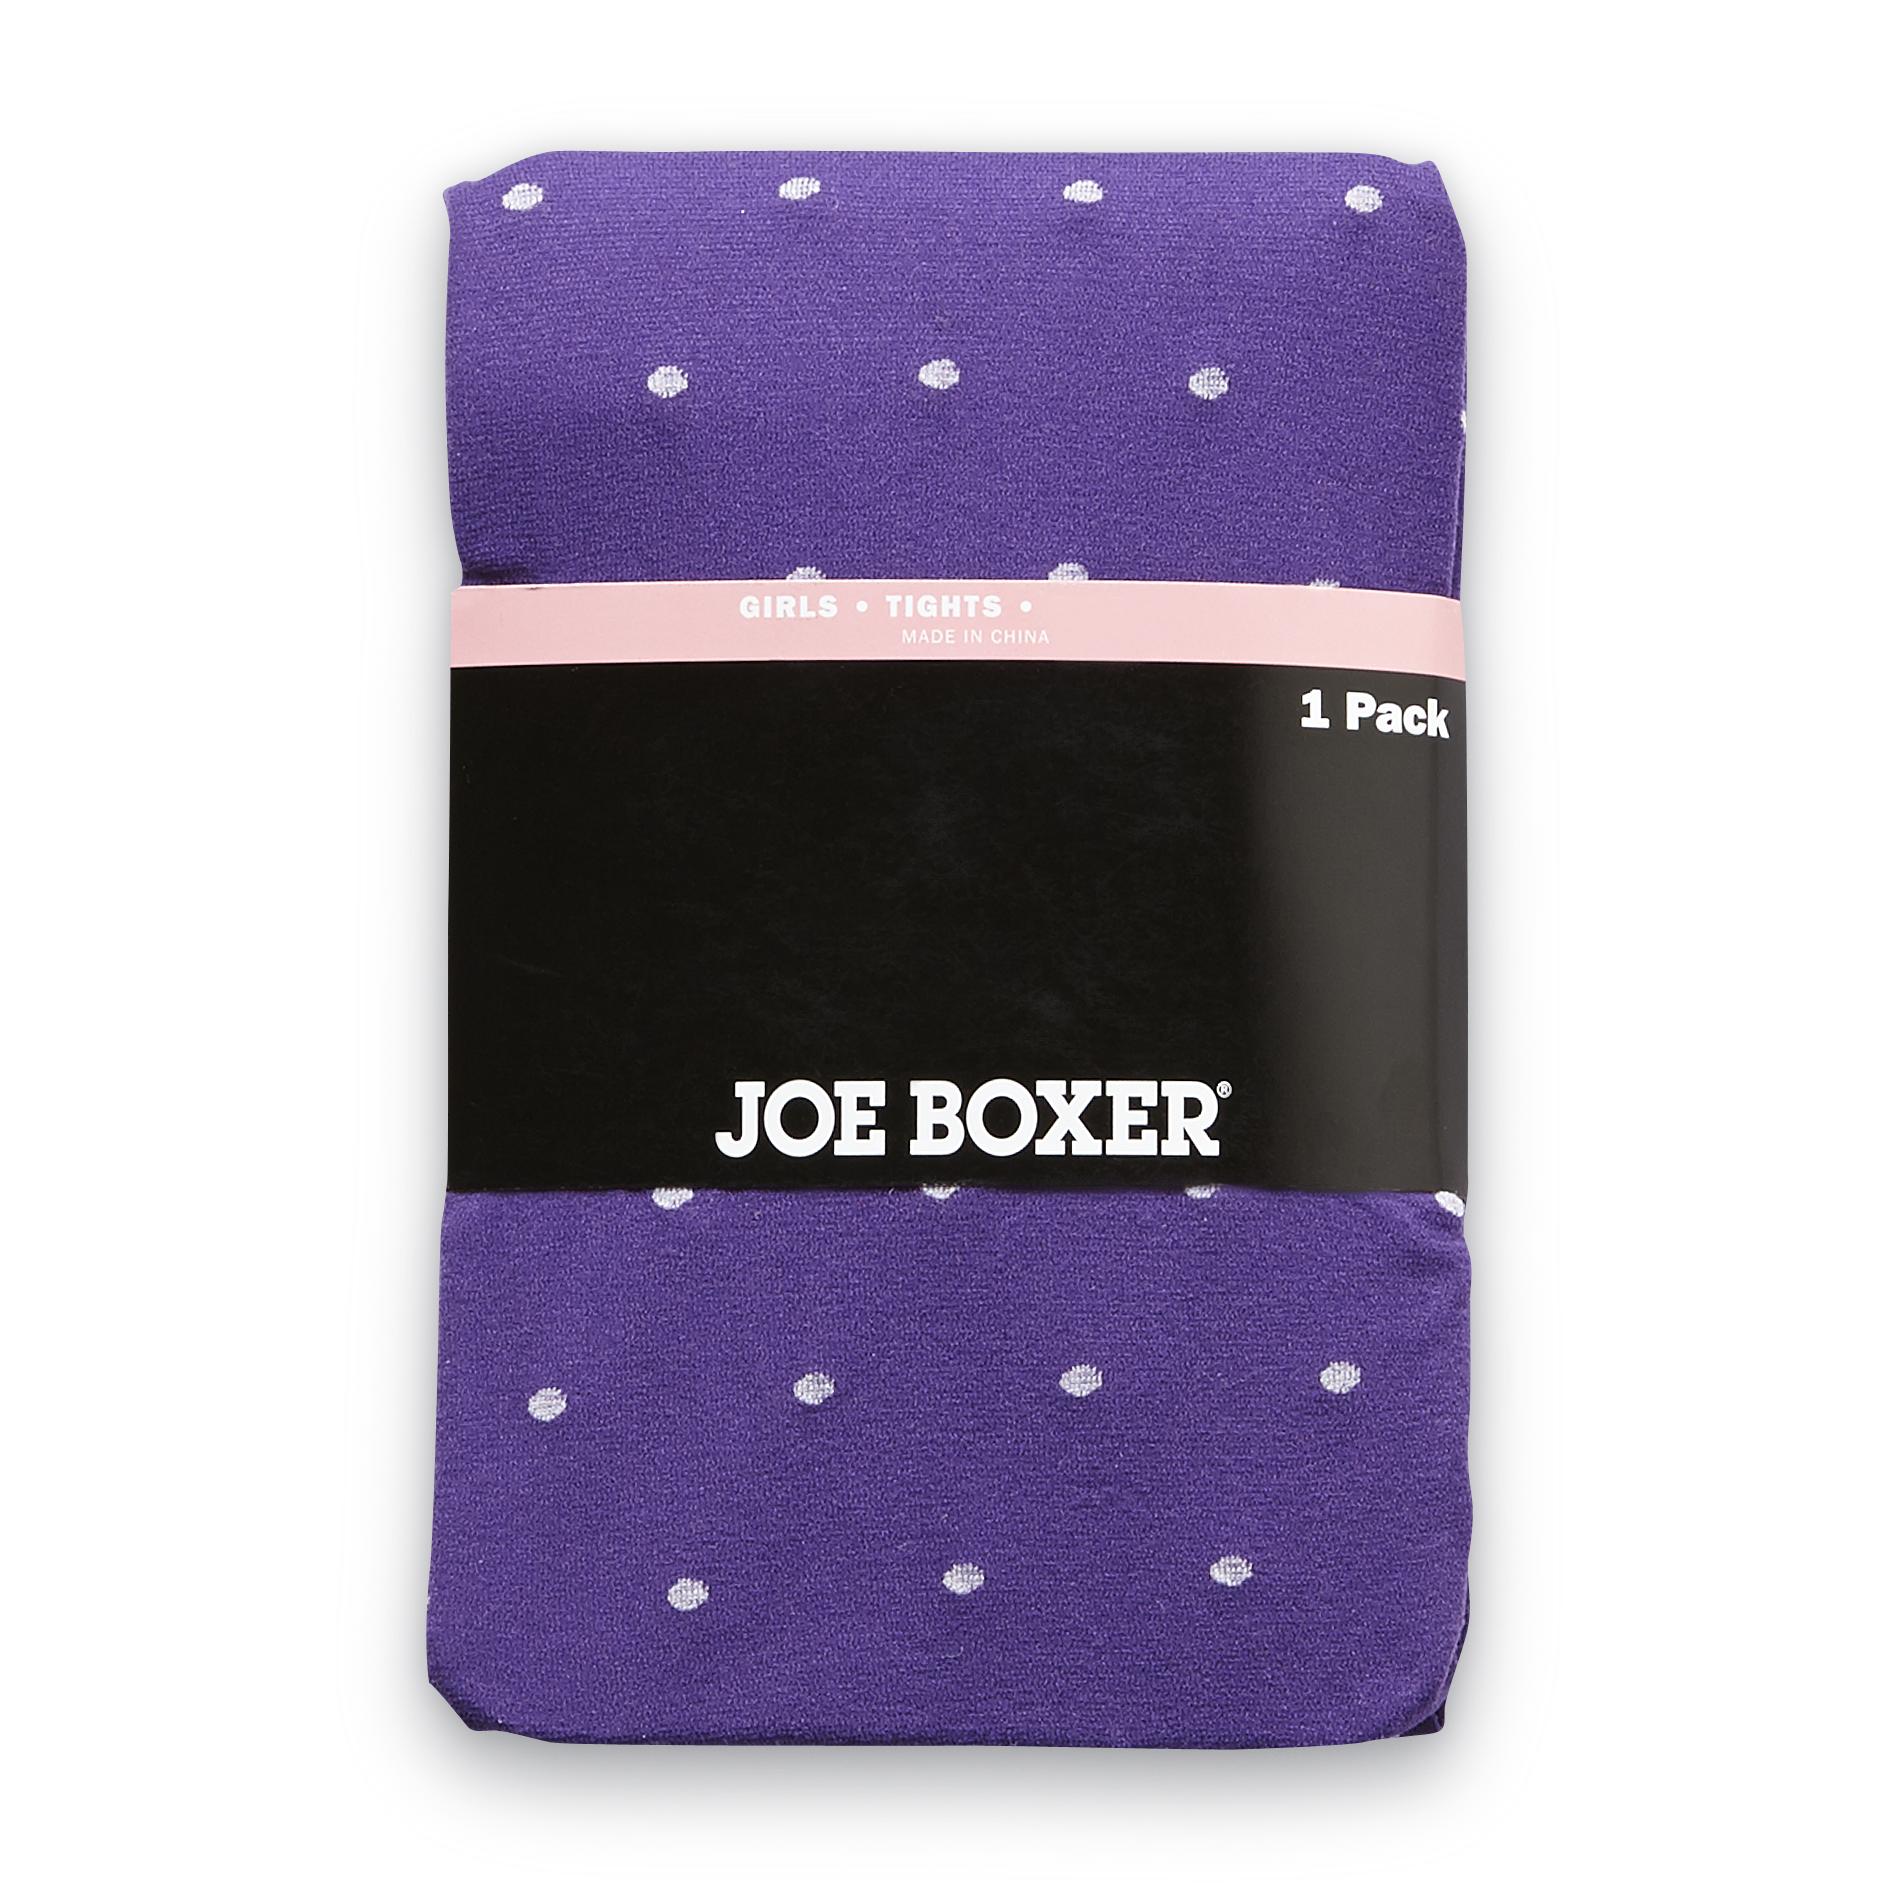 Joe Boxer Girl's Tights - Dotted